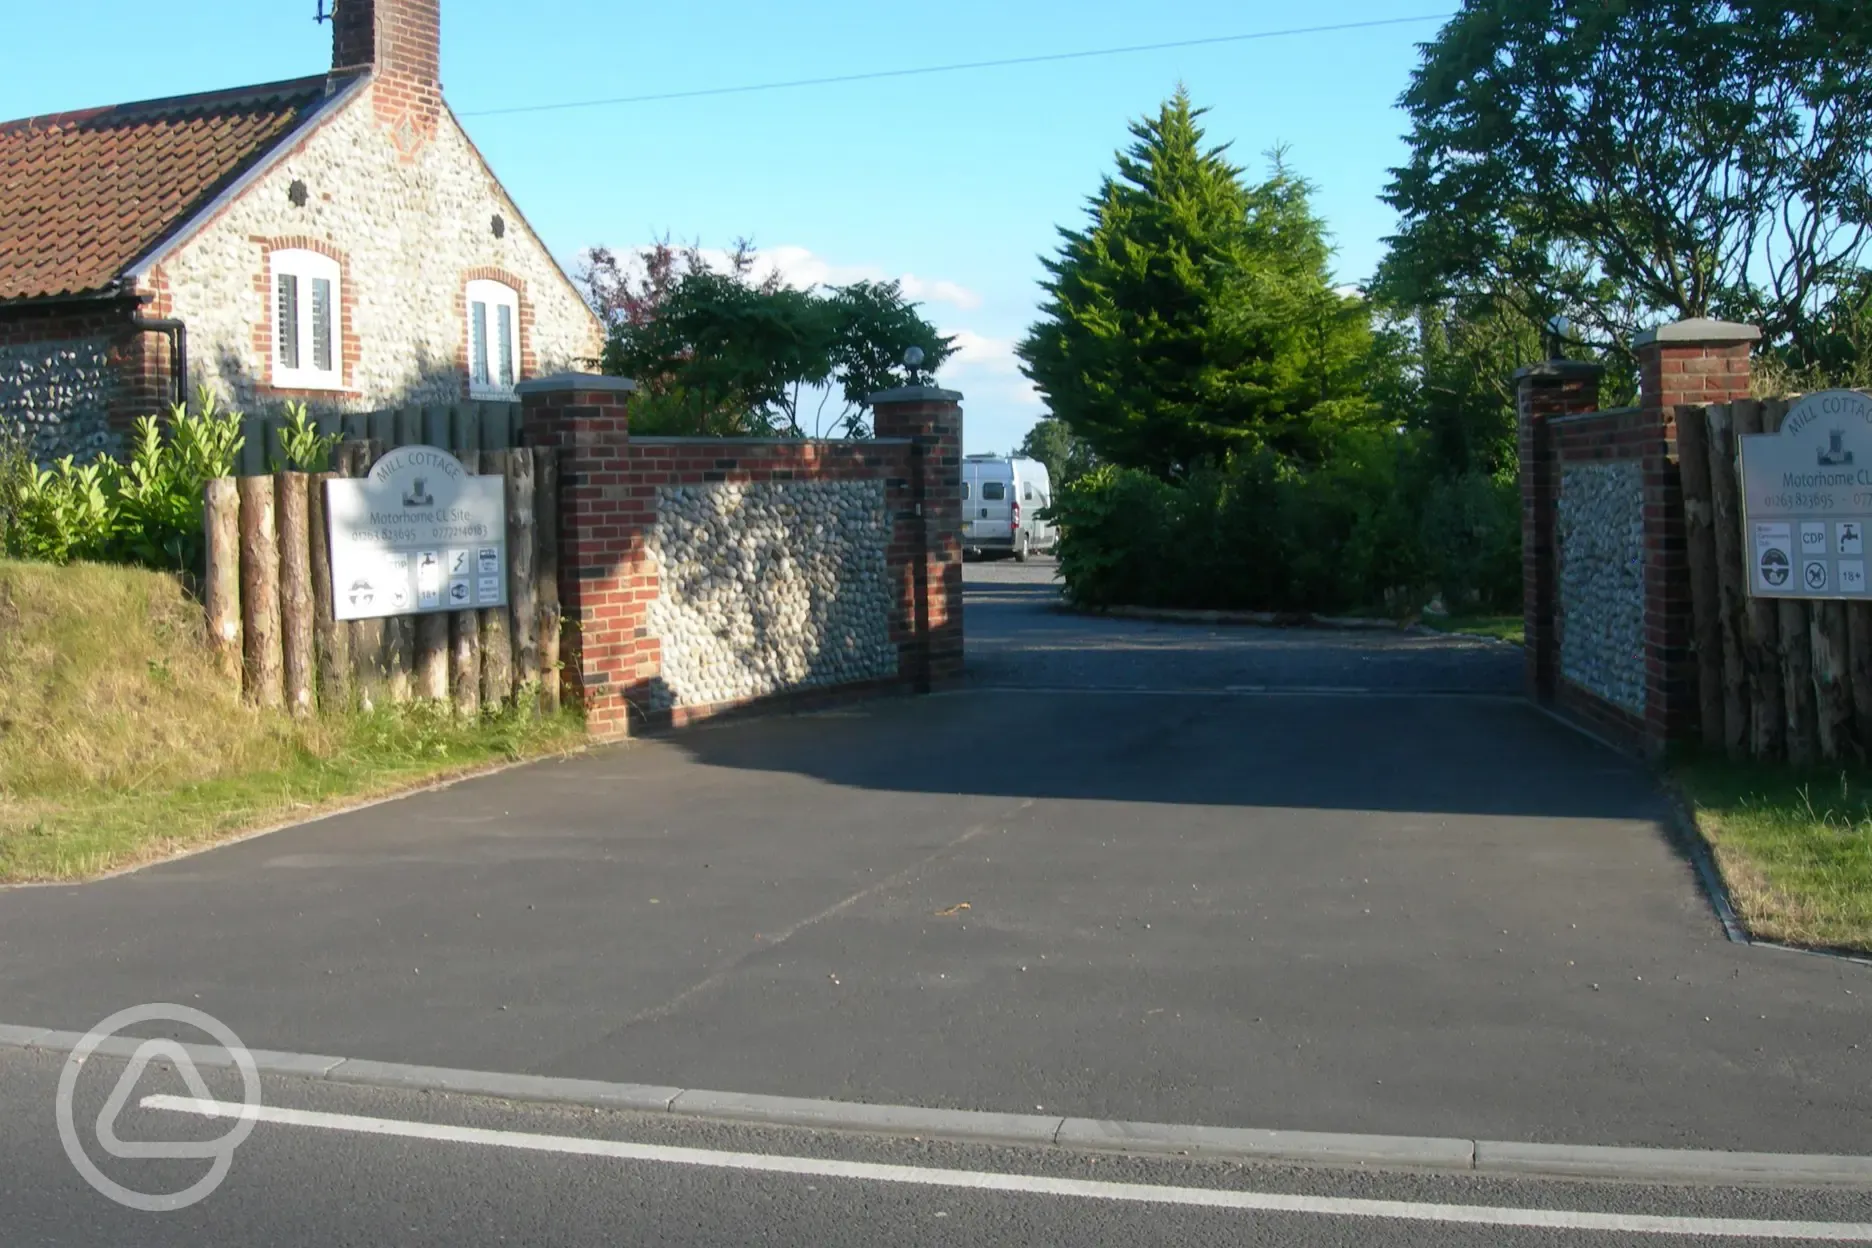 Entrance gates to Mill Cottage